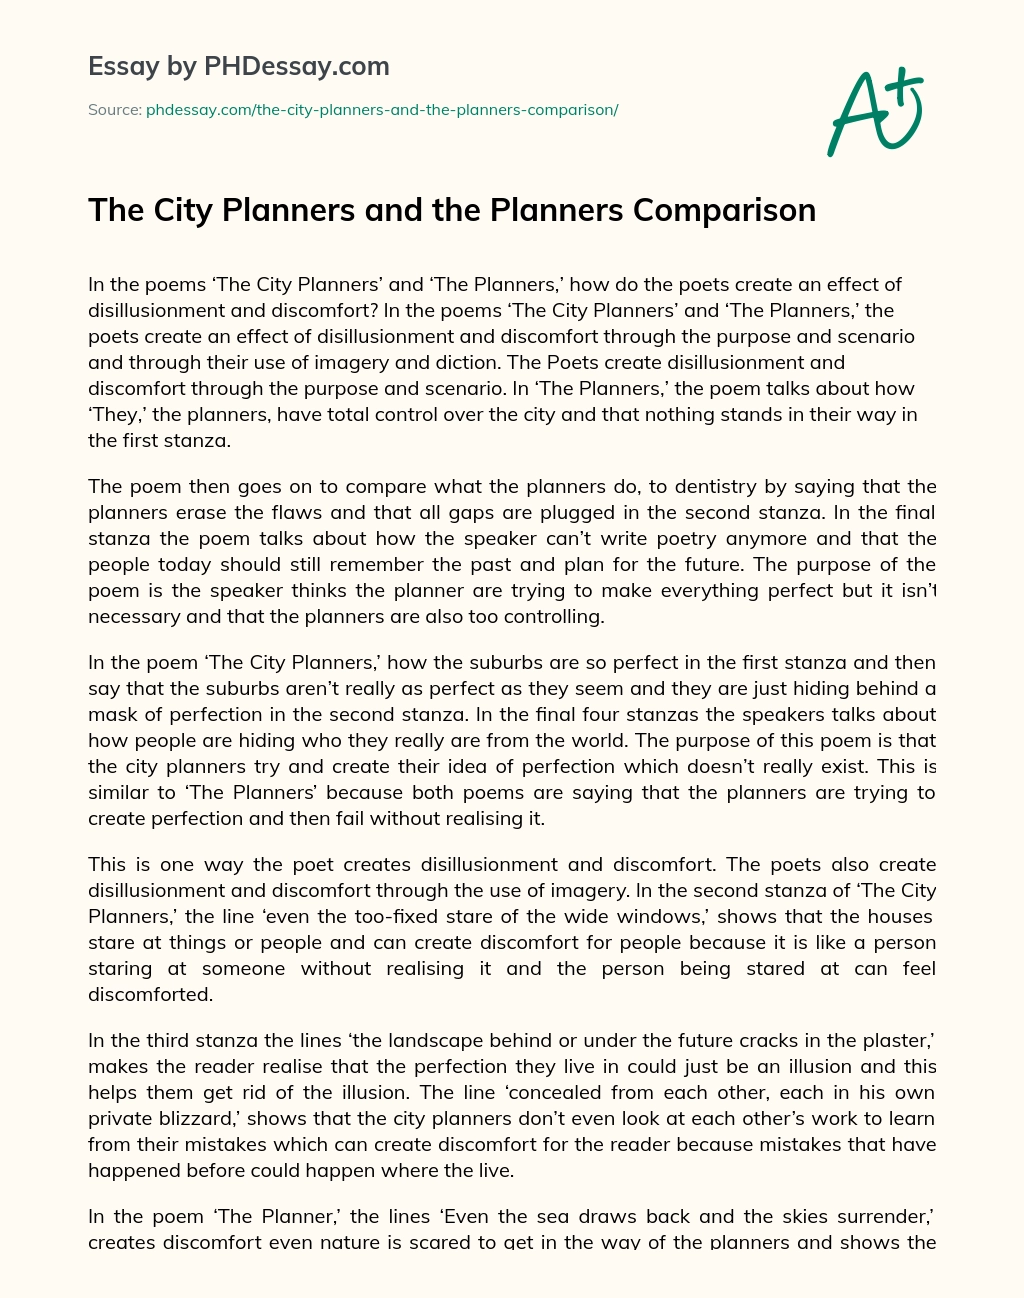 The City Planners and the Planners Comparison essay